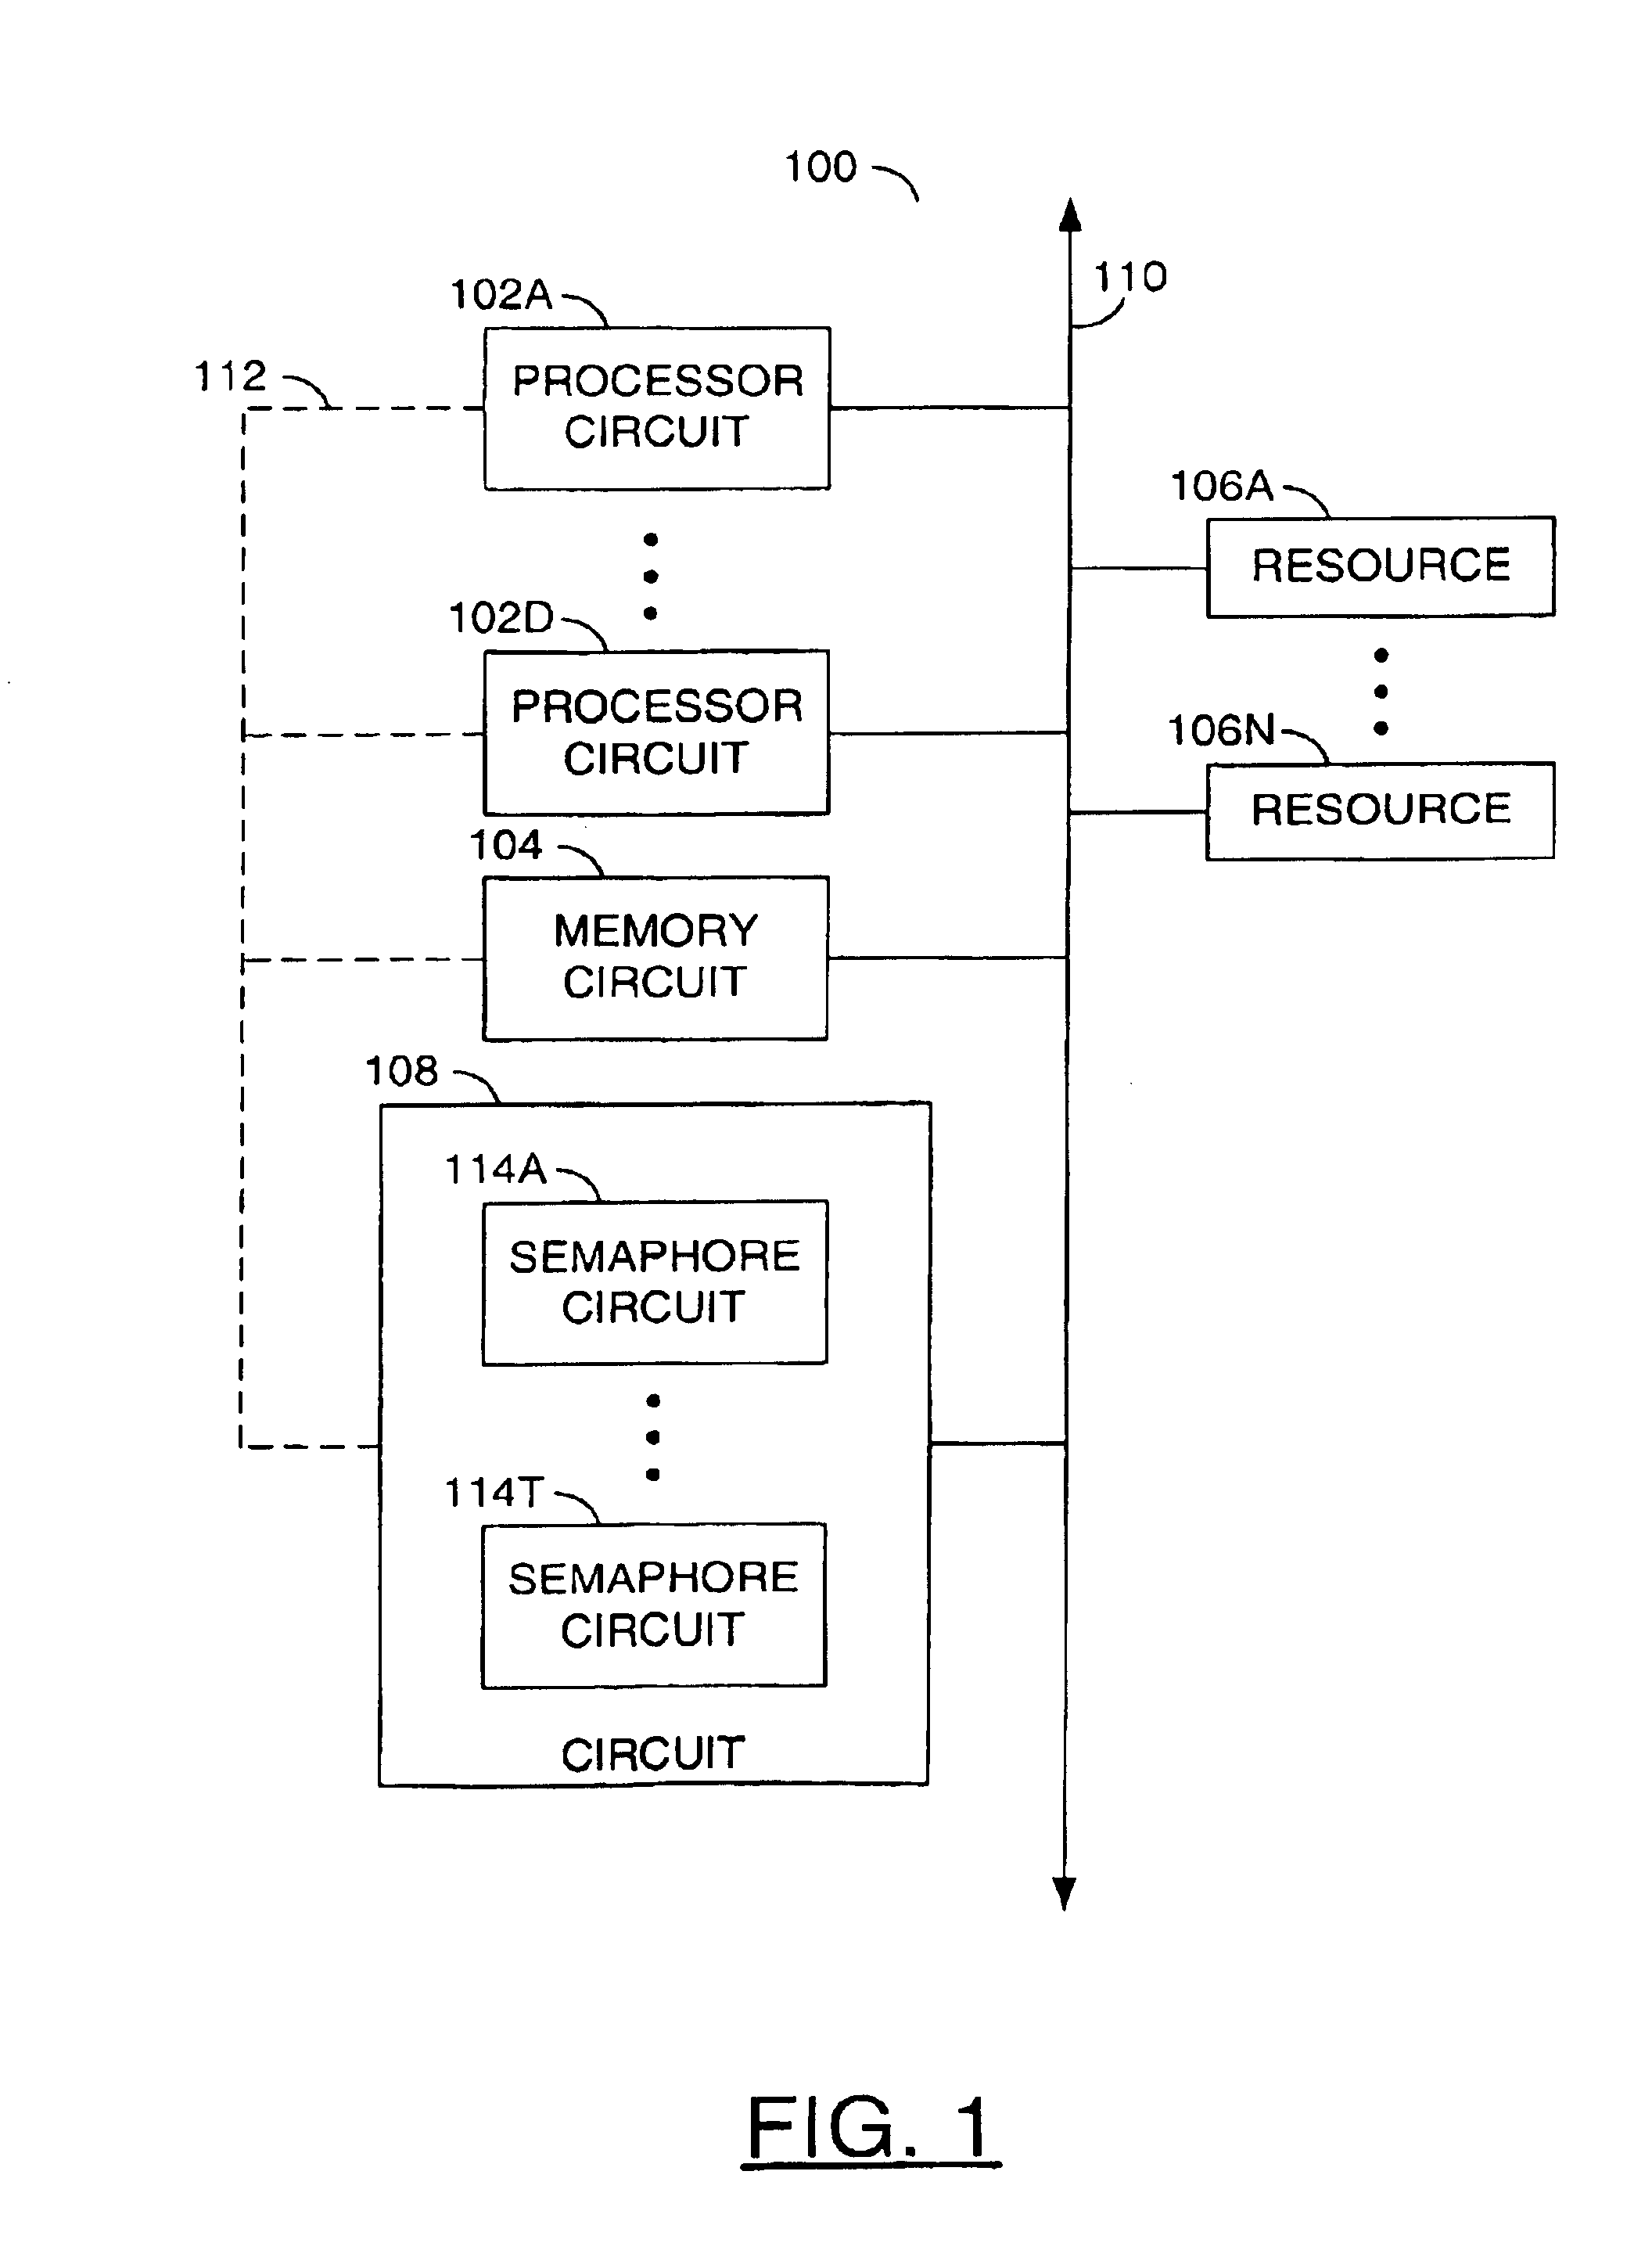 Hardware semaphores for a multi-processor system within a shared memory architecture